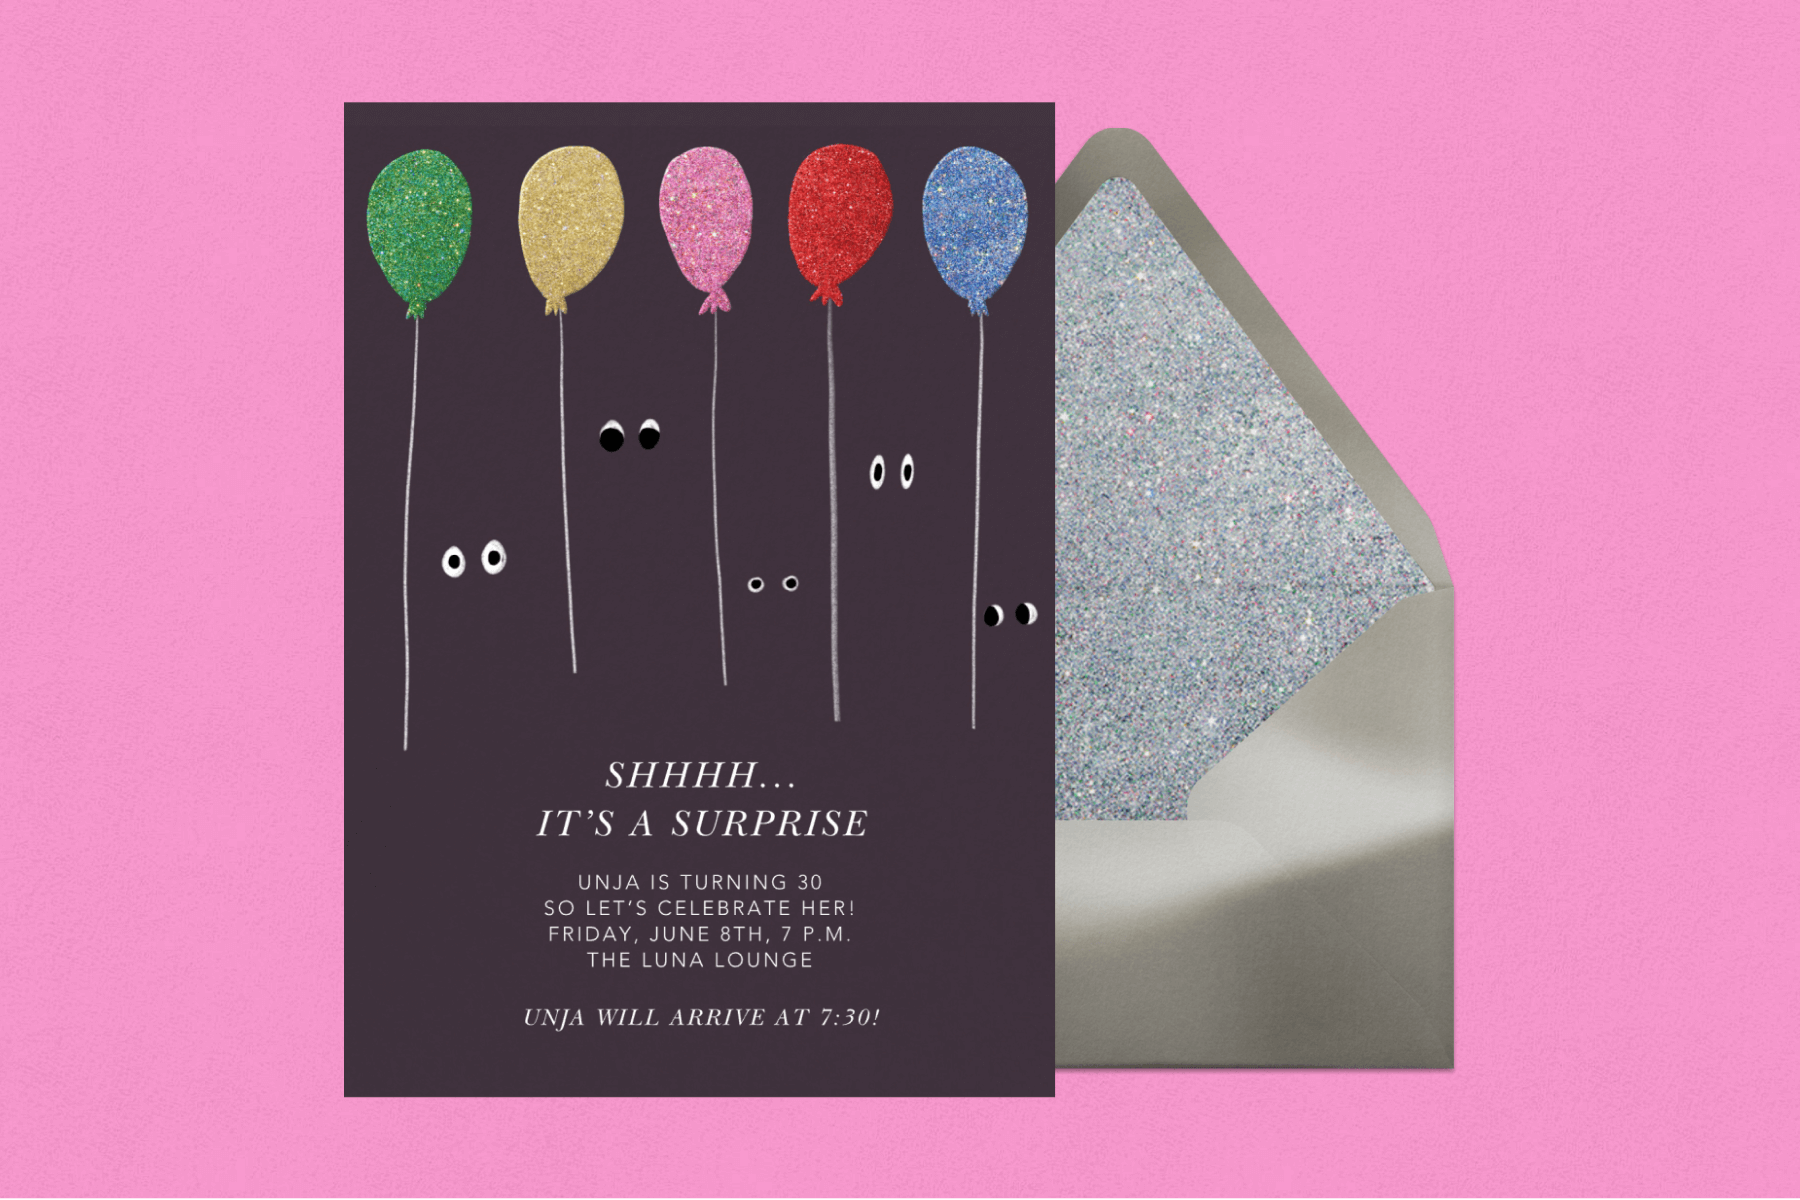 A black invitation with five balloons in multicolored glitter and eyes between the strings—as if people are in the dark, beside a silver envelope with glitter liner.